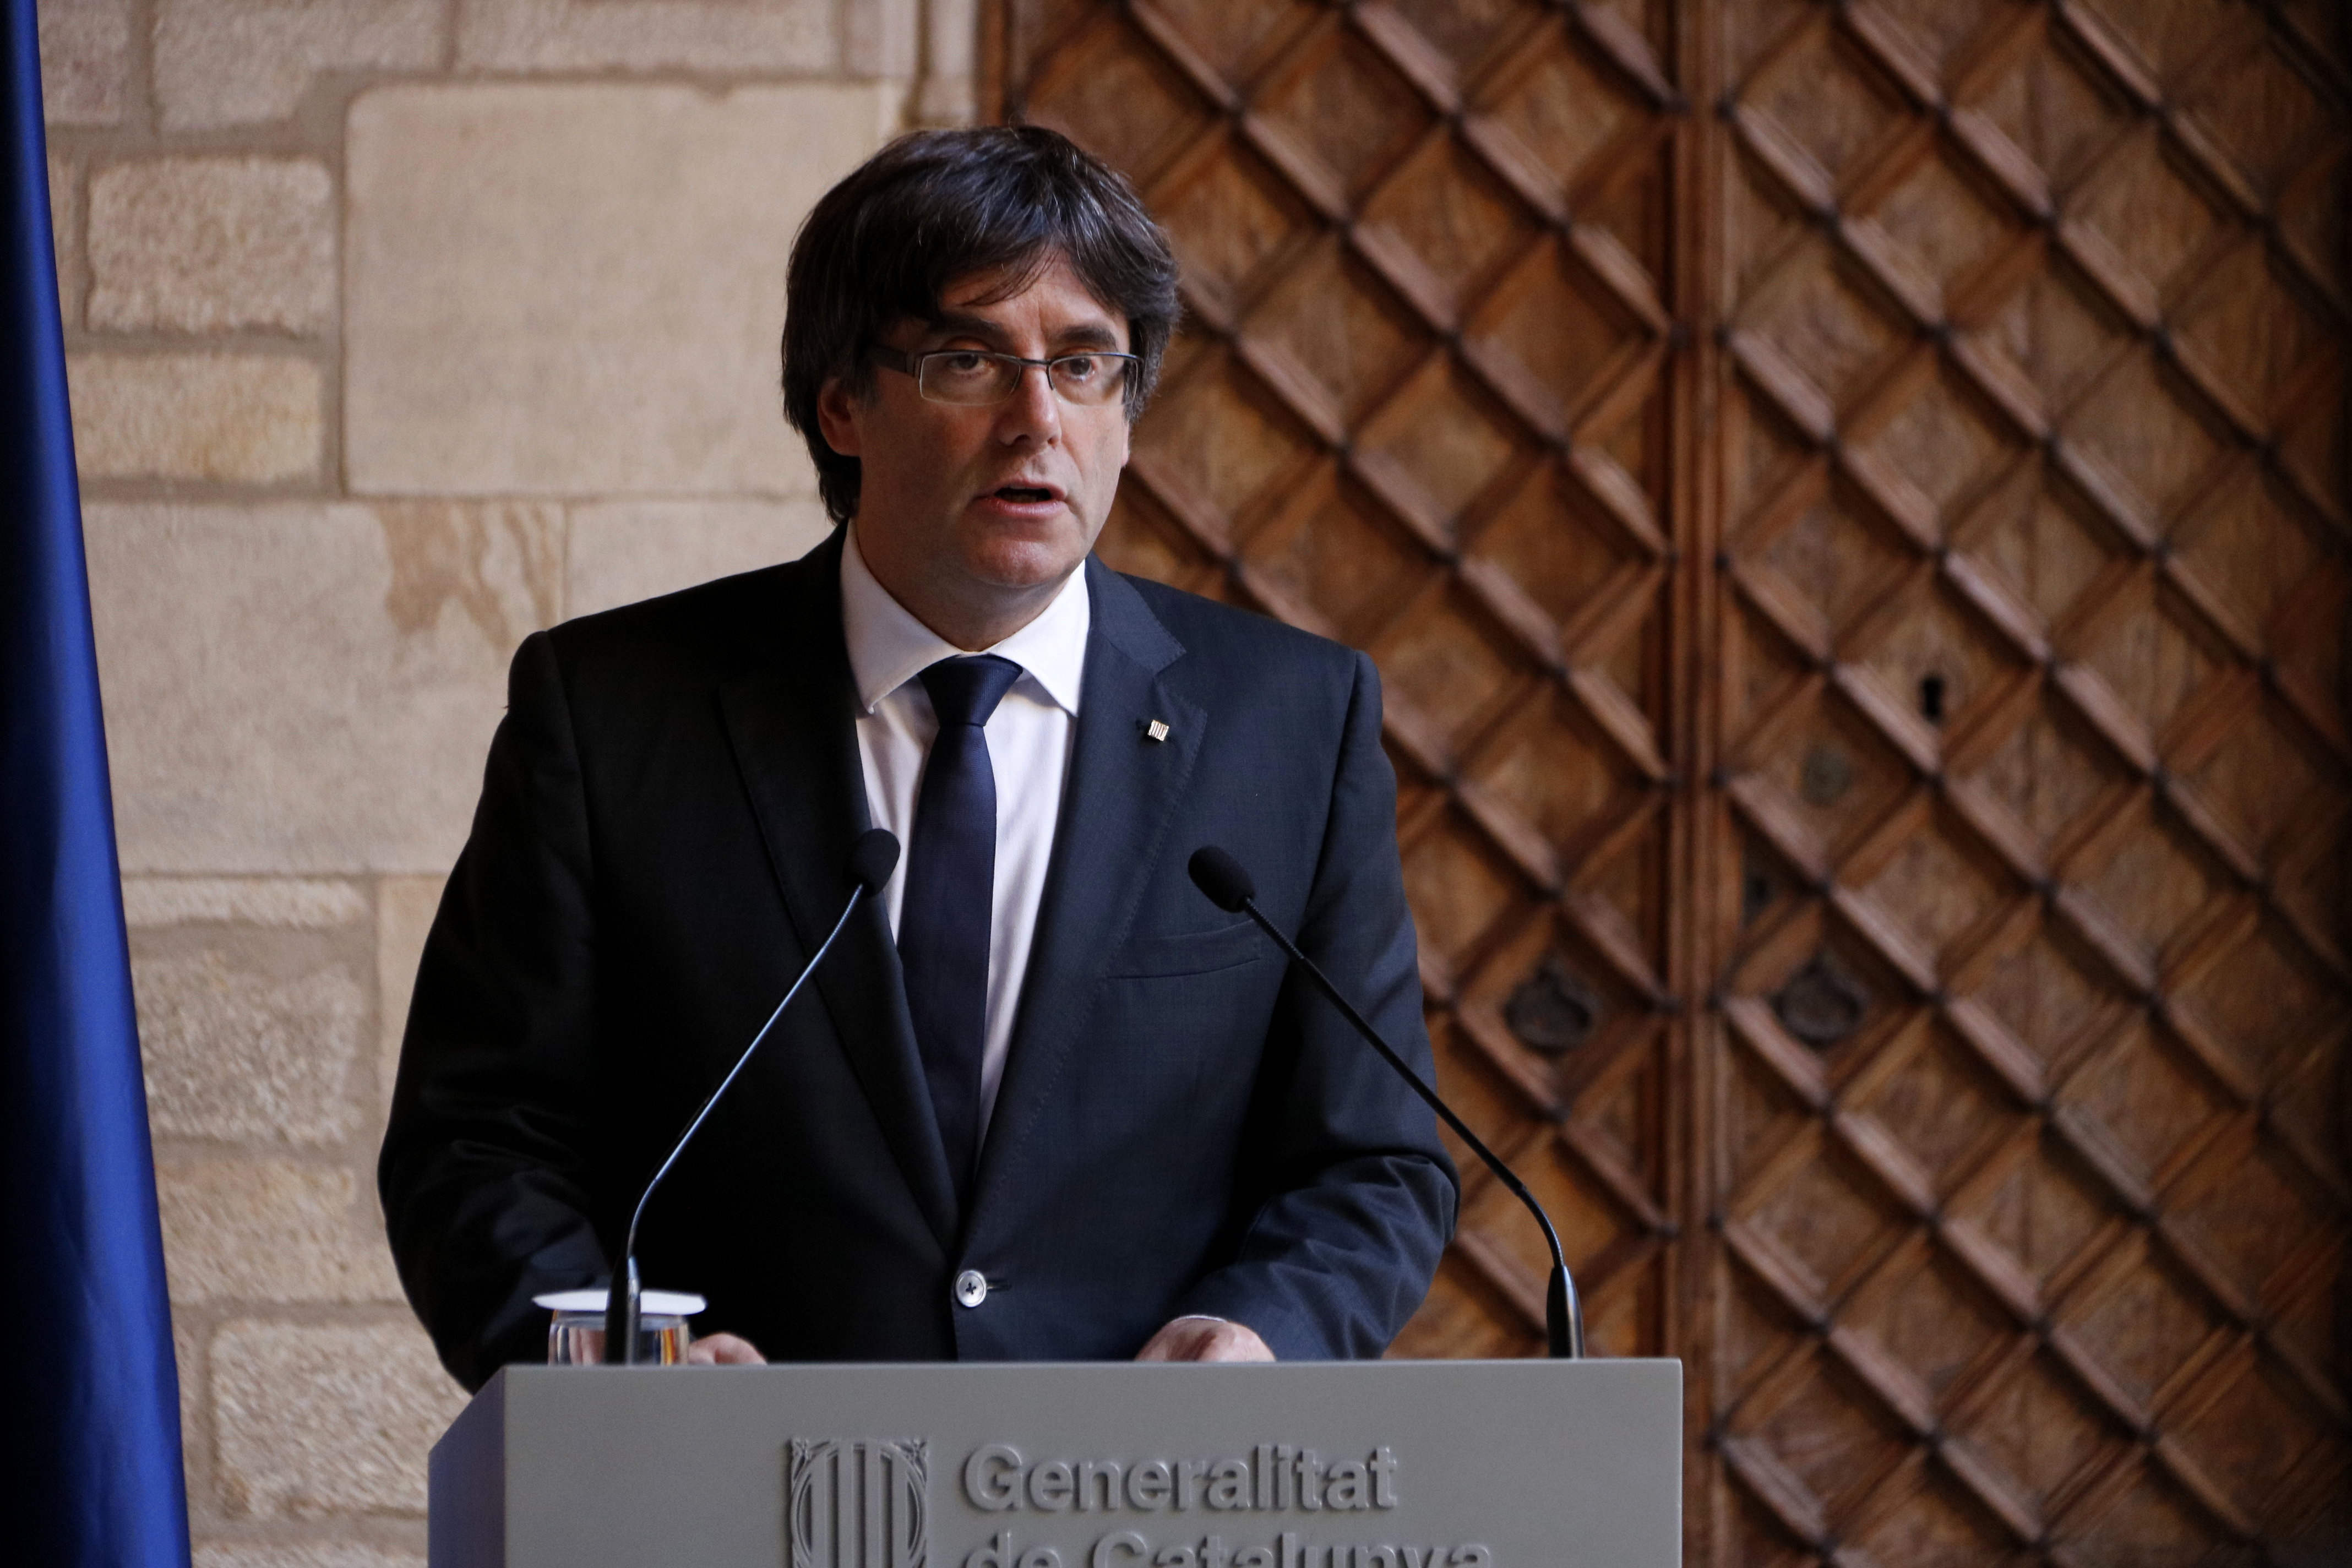 Catalan president Carles Puigdemont during his speech (by Guillem Roset)